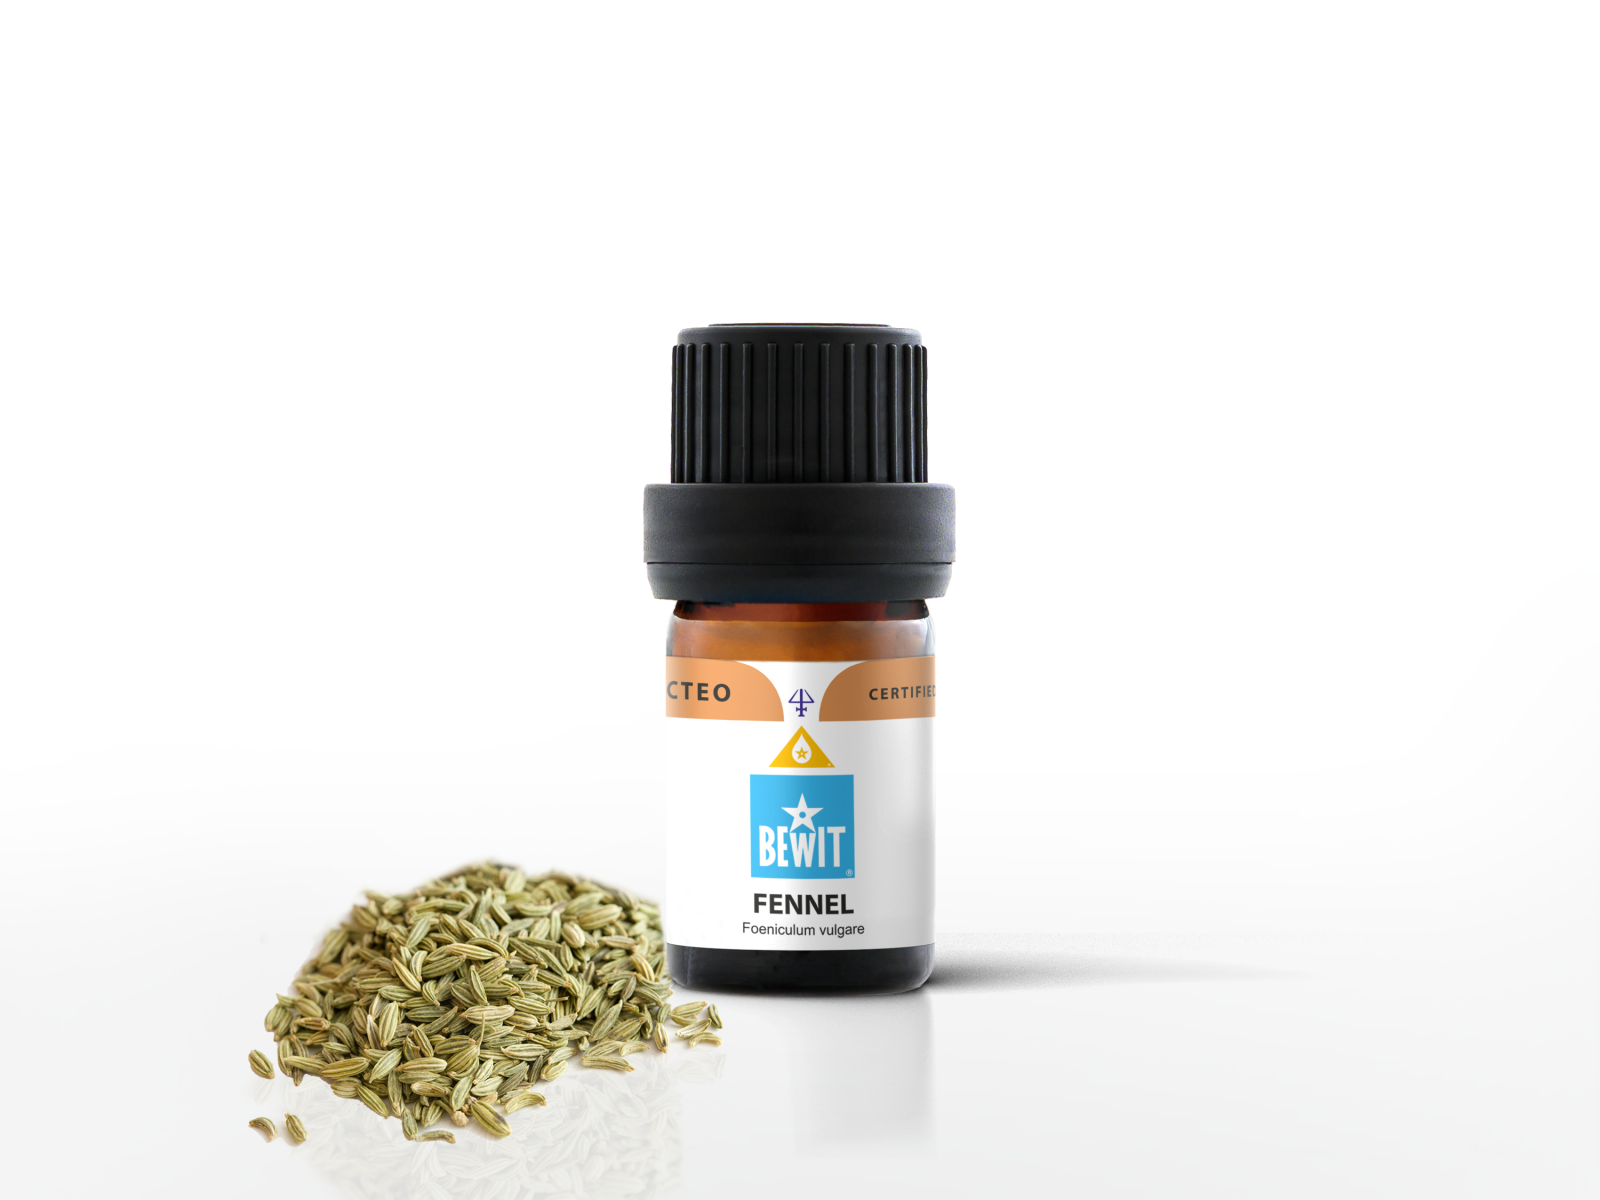 Fennel - This is a 100% pure essential oil - 2